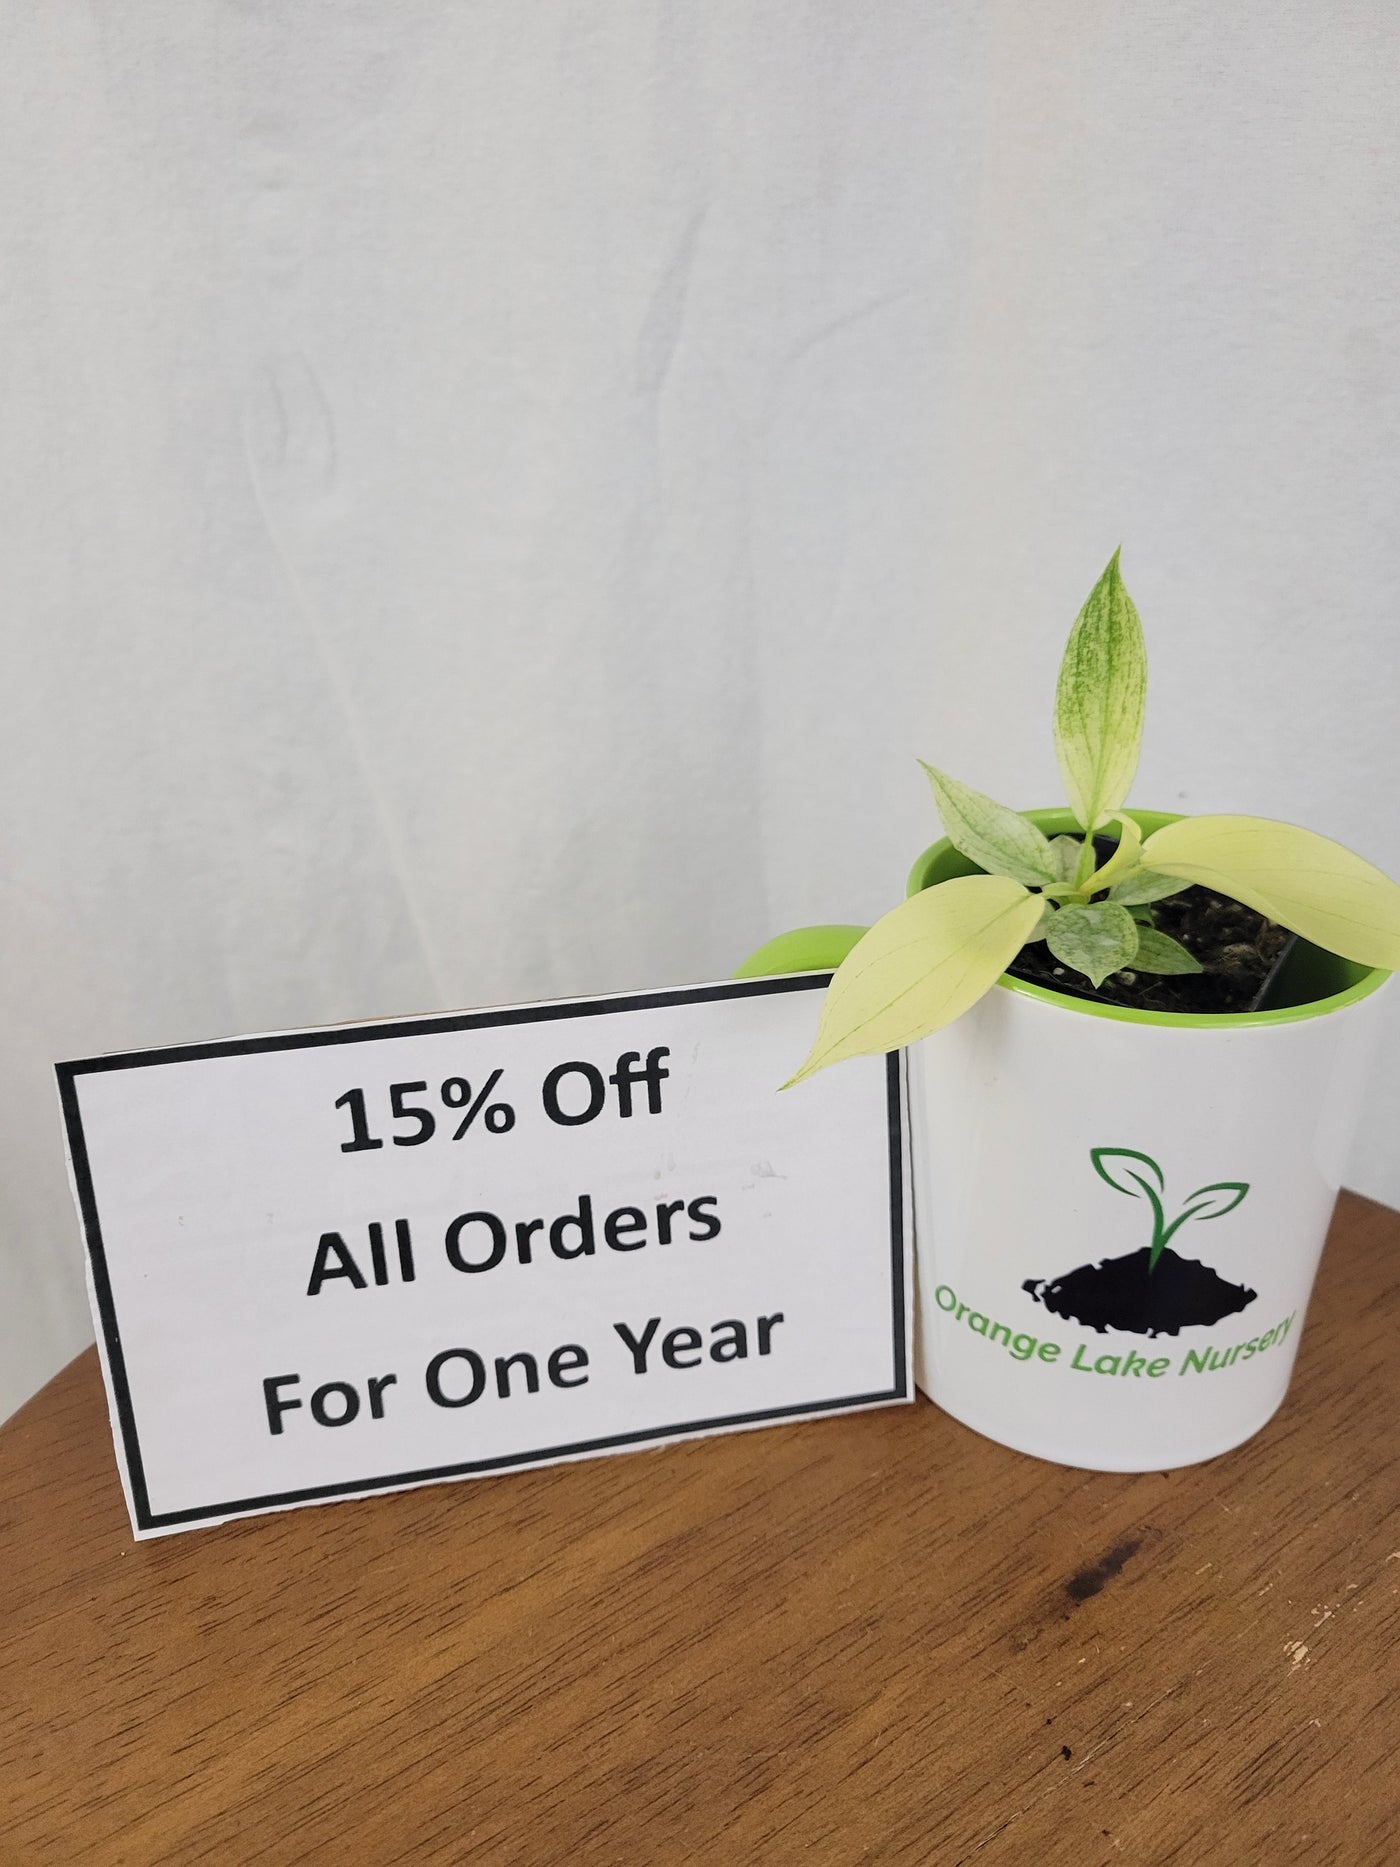 15% Off All Orders For 1 Year